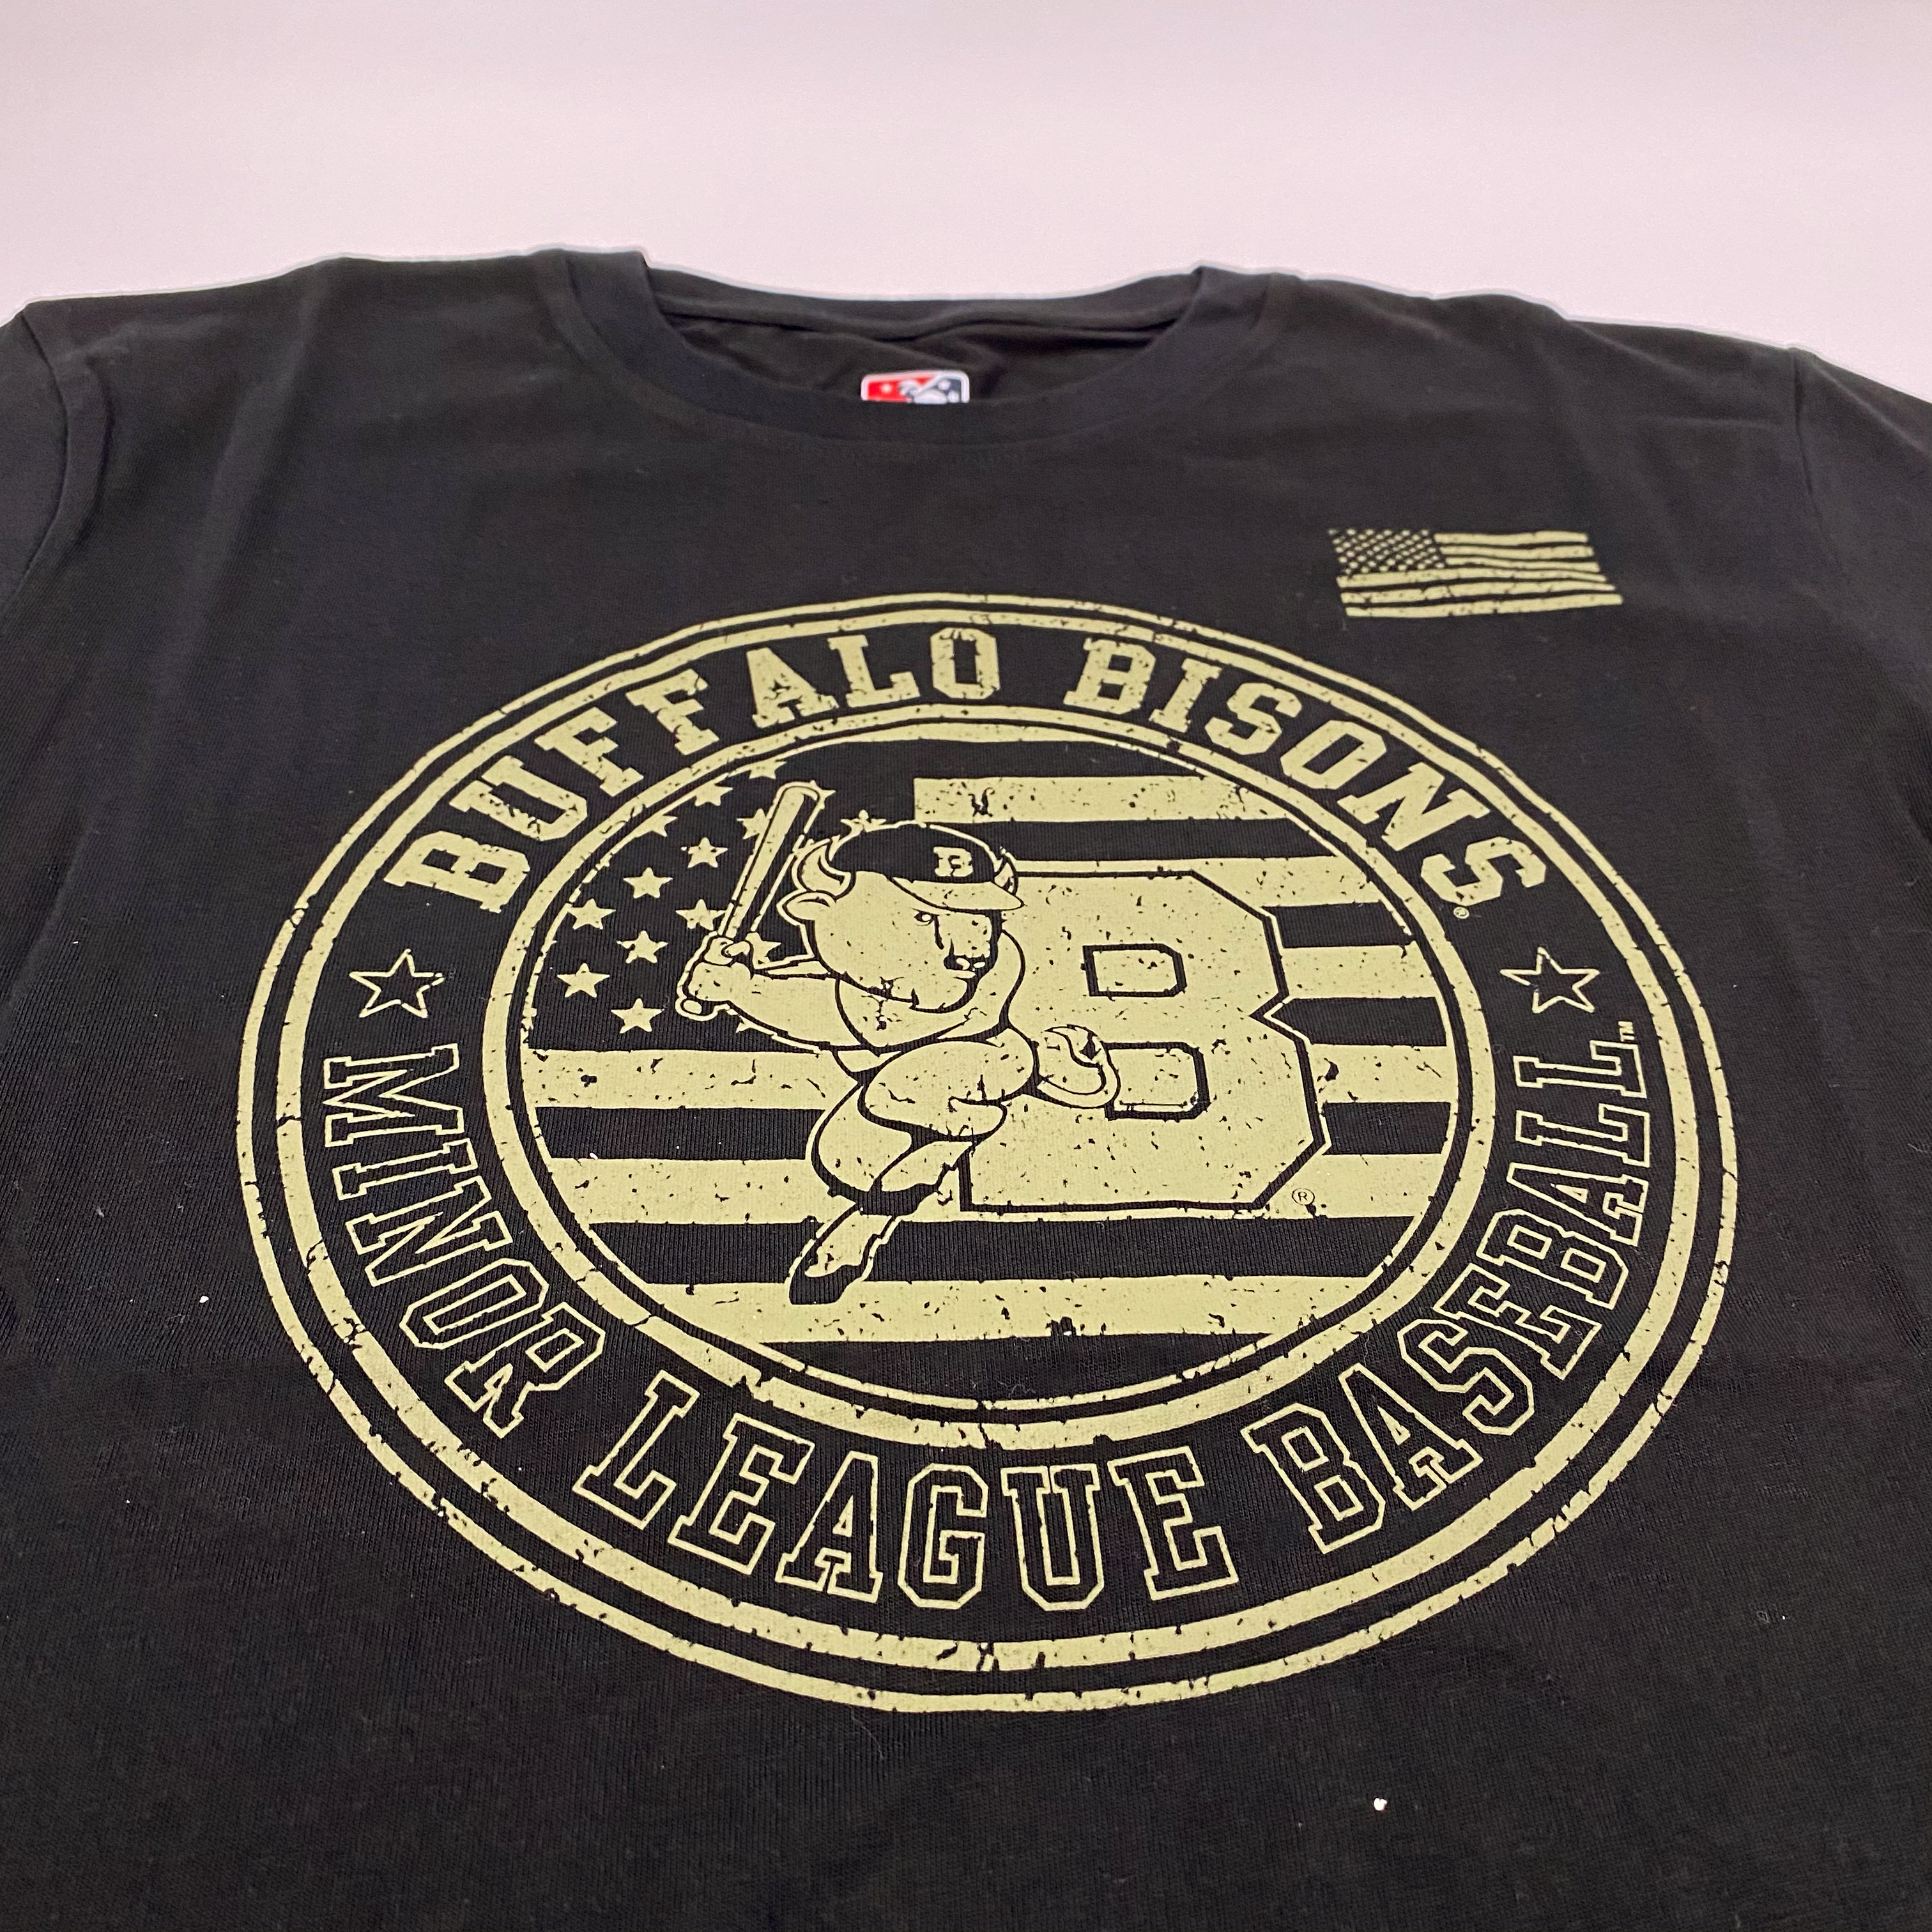 Armed Store Bisons New The BFLO | Forces T-Shirt Era Buffalo Black